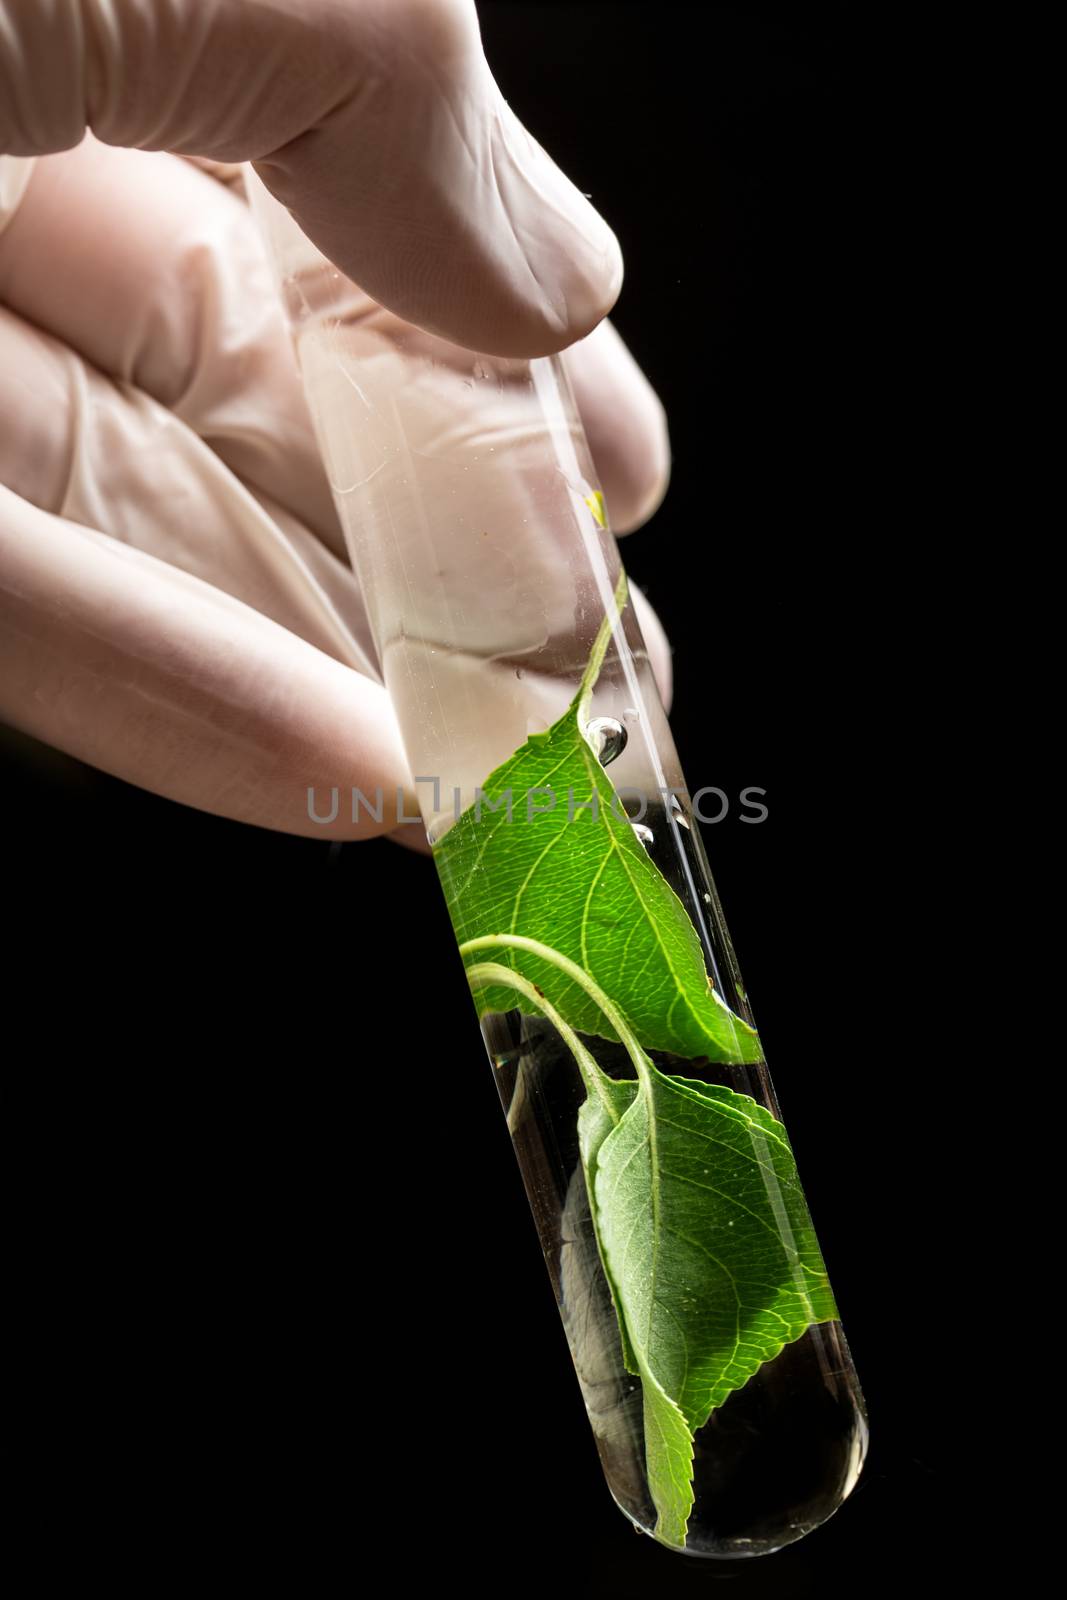 Hand in glove holding test tube with plant by Garsya